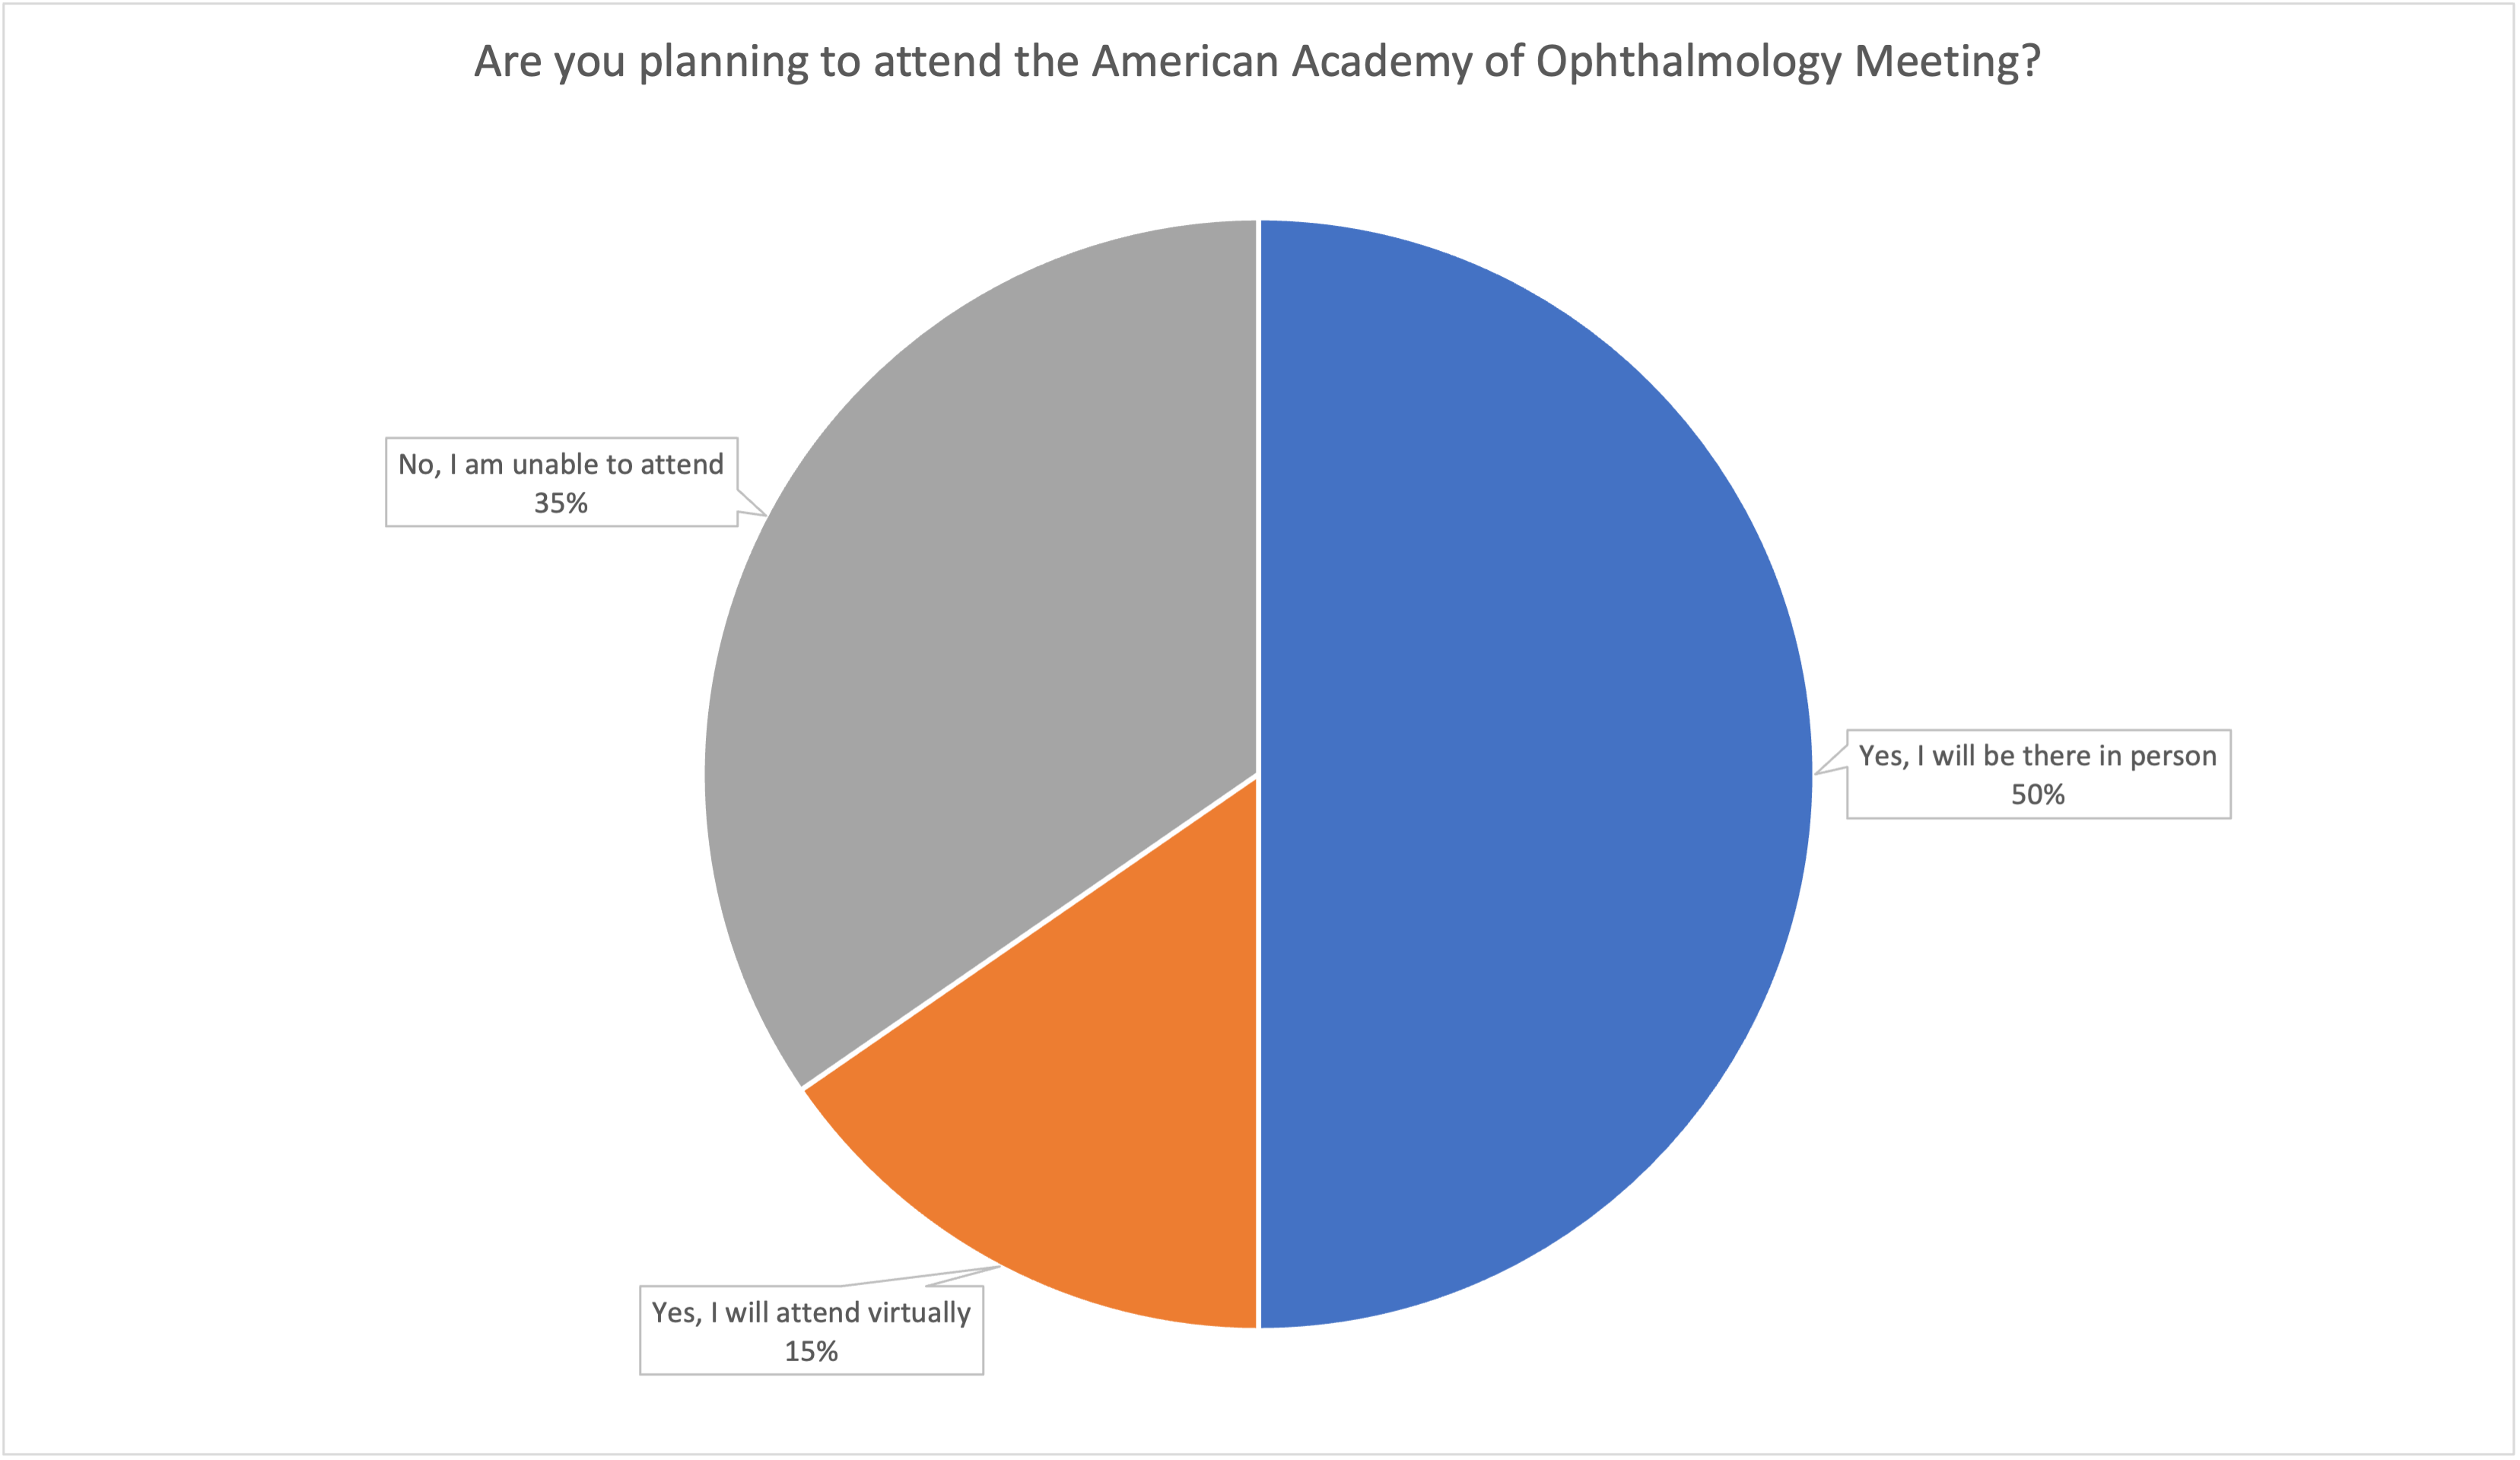 Poll results: Are you planning to attend the American Academy of Ophthalmology Meeting?